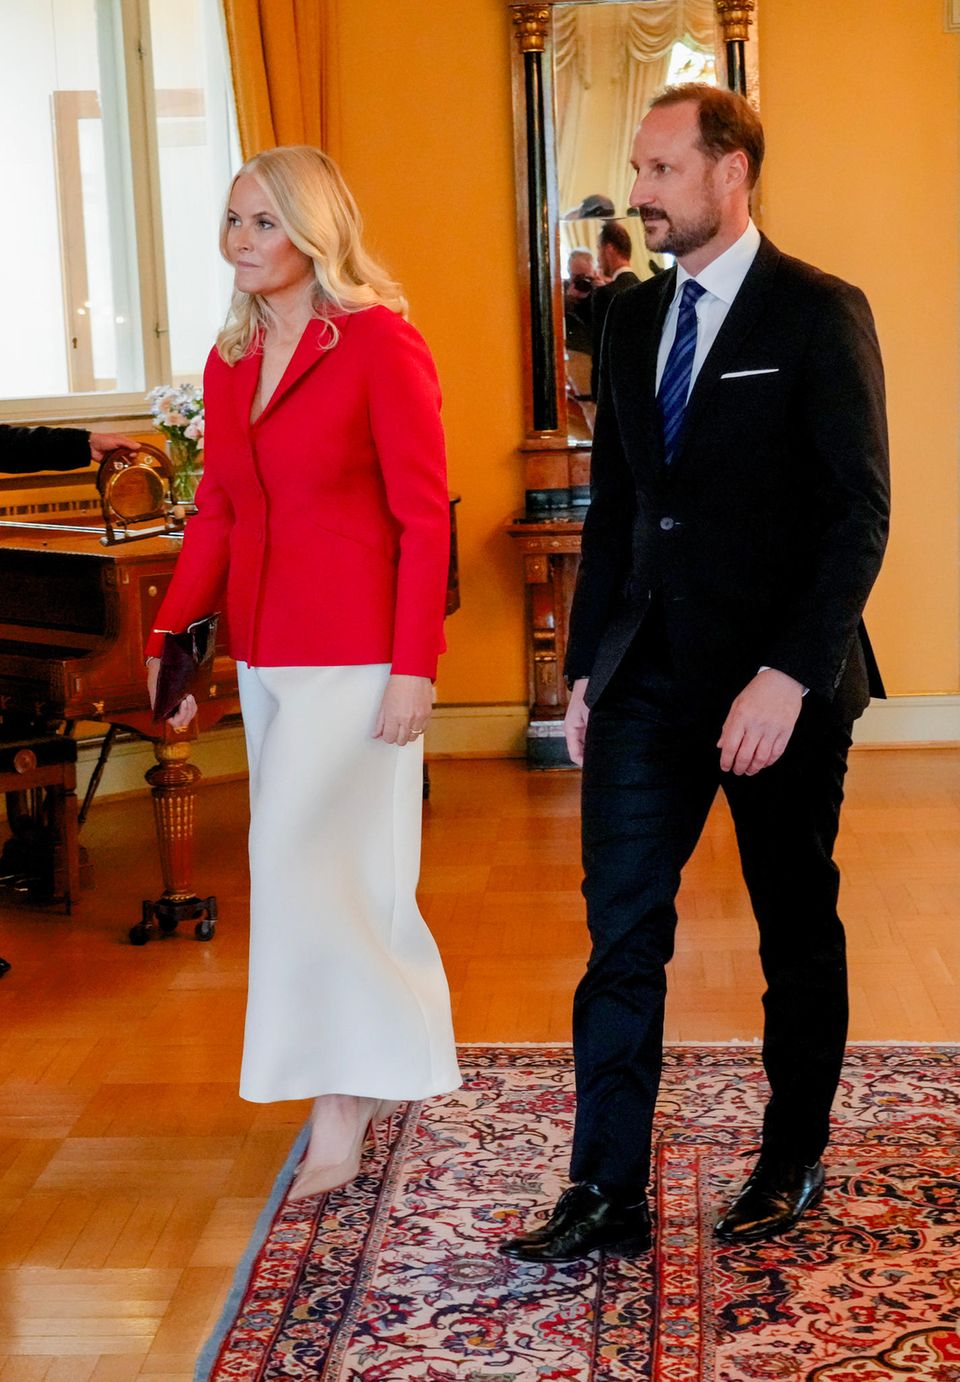 At the meeting at the residence of the Norwegian Prime Minister as part of the Moldovan President's state visit to Norway, Mette-Marit wore a trendy satin skirt in elegant white.